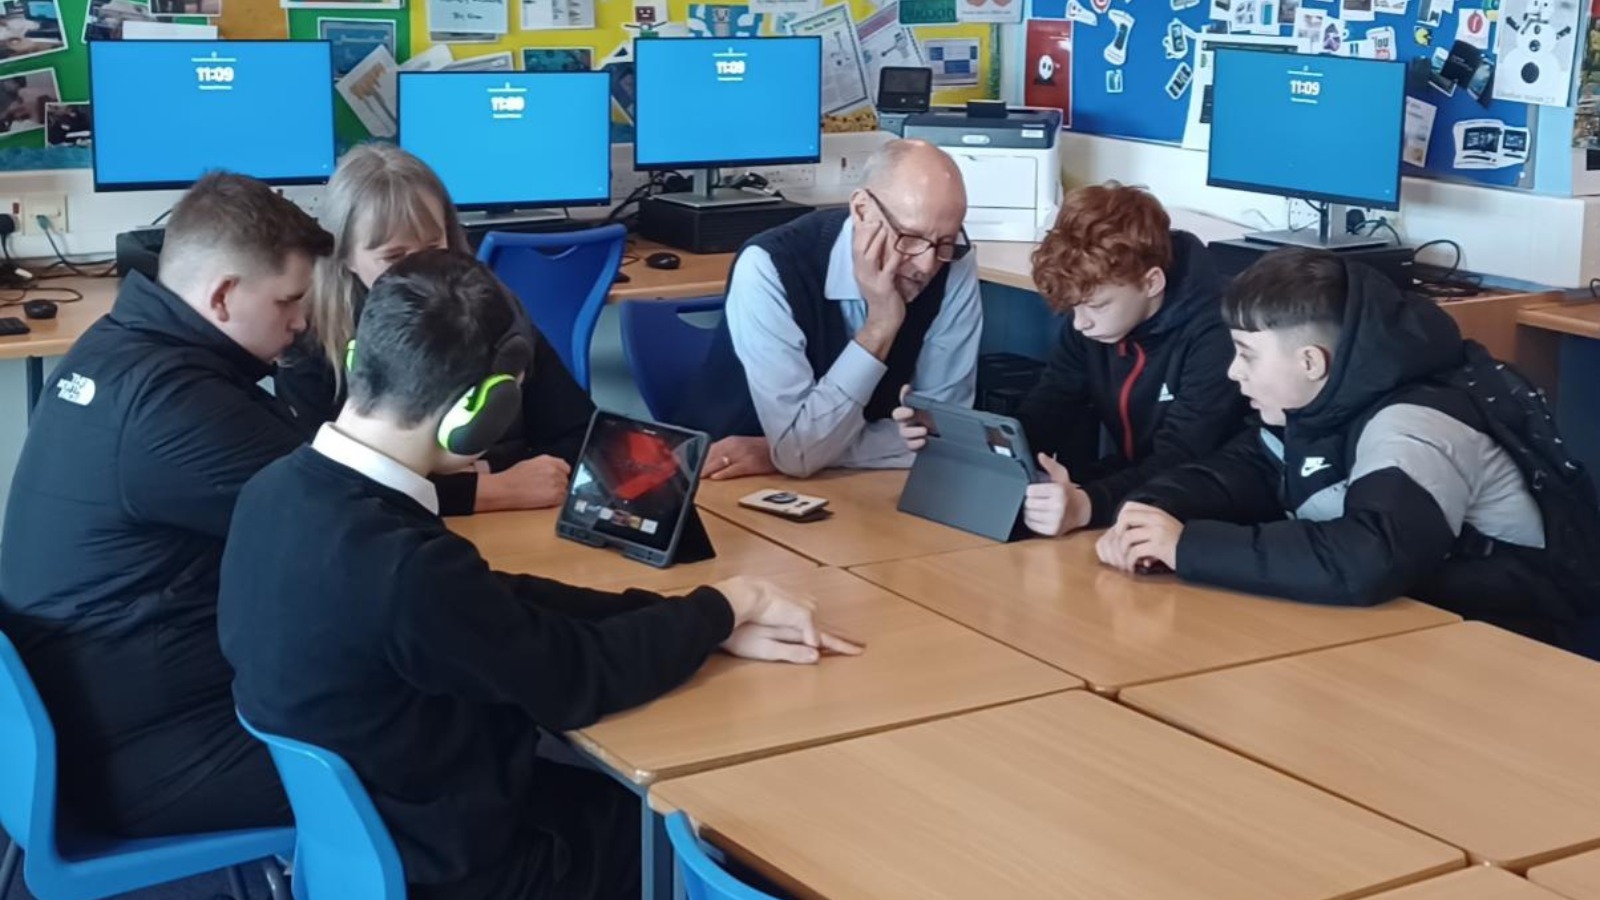 School pupils sit around a desk, looking at iPads, with a teacher in a classroom